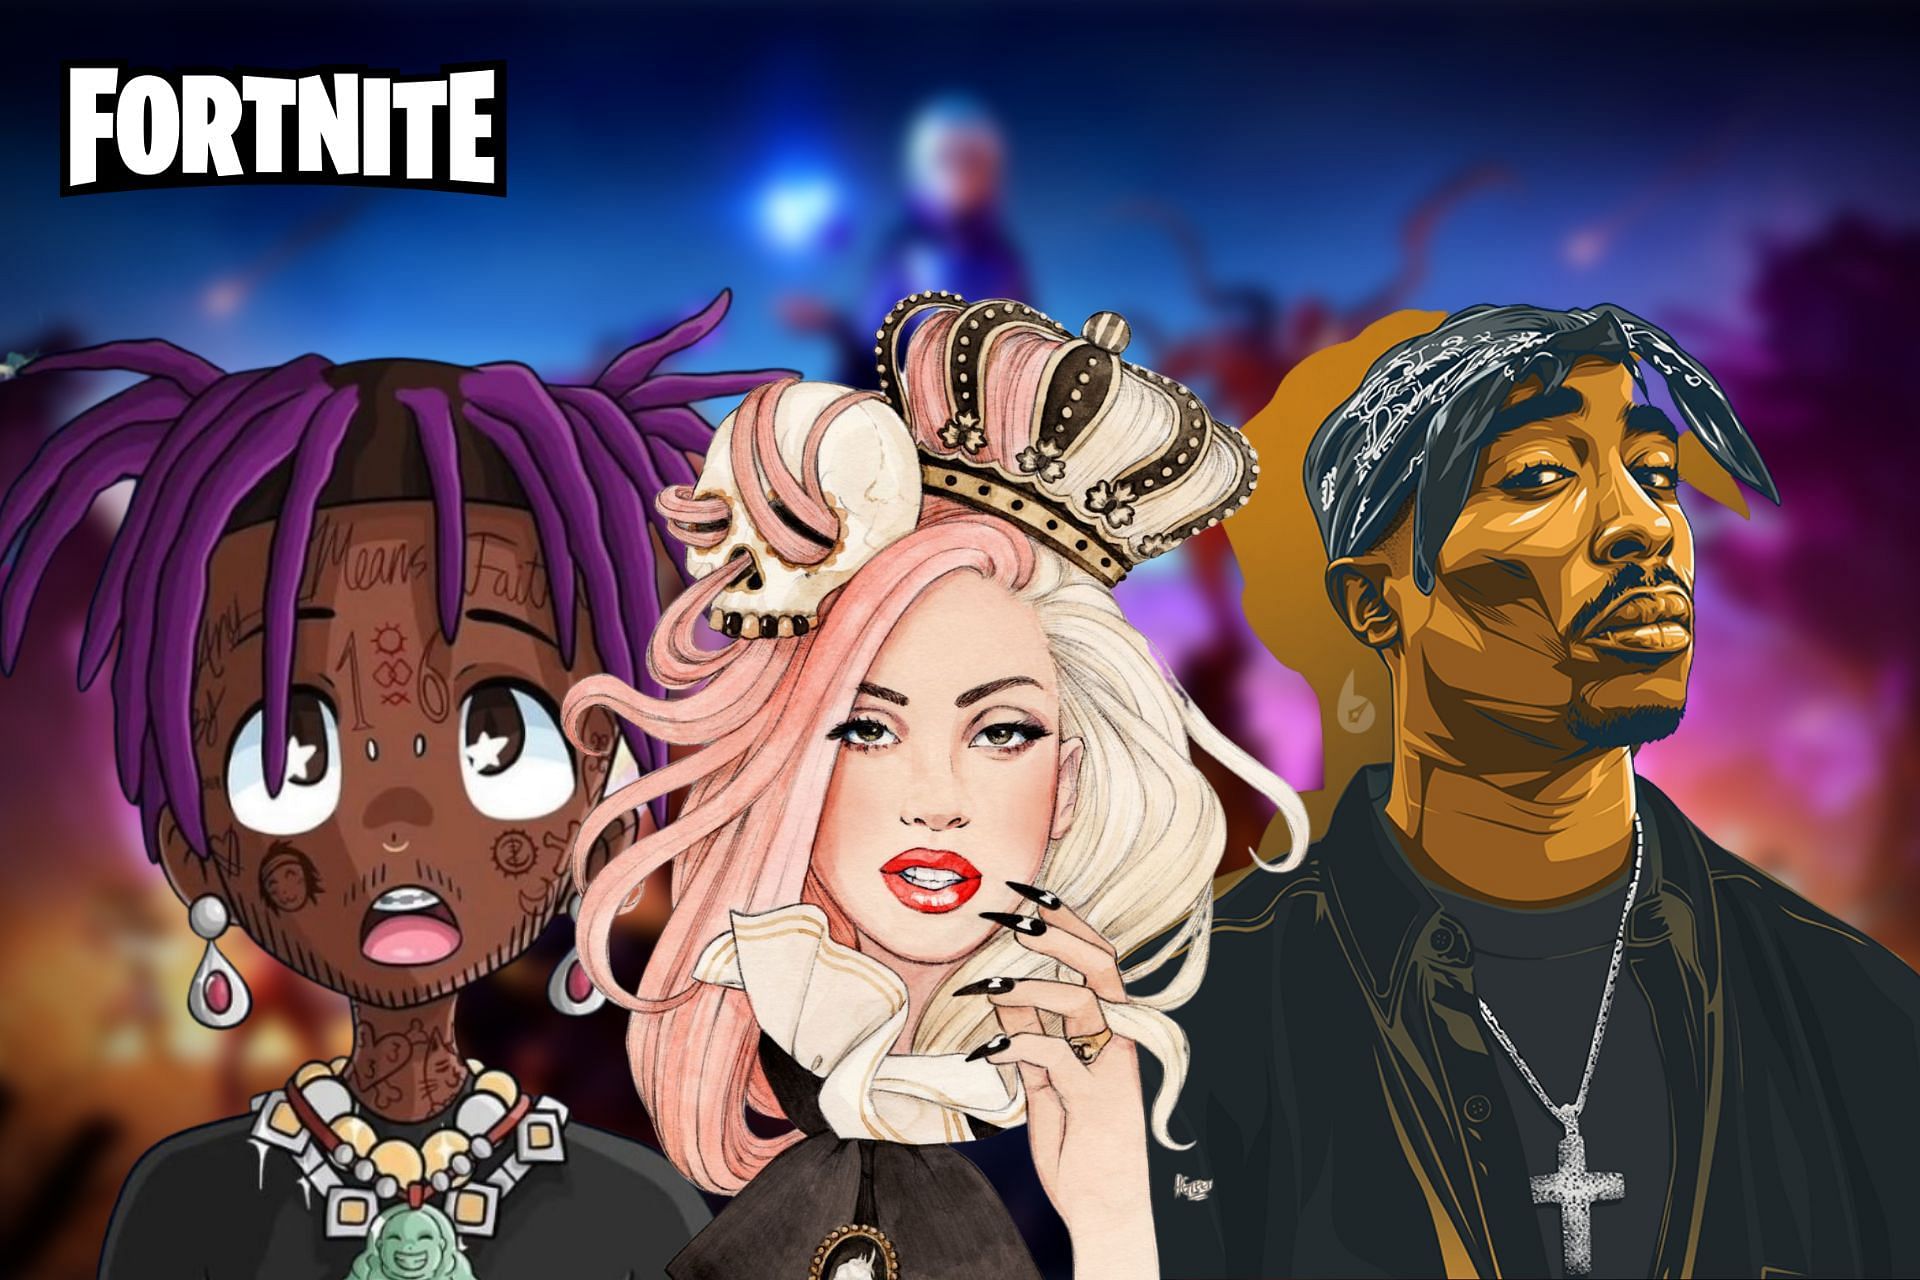 Fortnite might introduce Lady Gaga, Lil Uzi Vert, and 2Pac skins in Chapter 3 (Image via Sportskeeda)